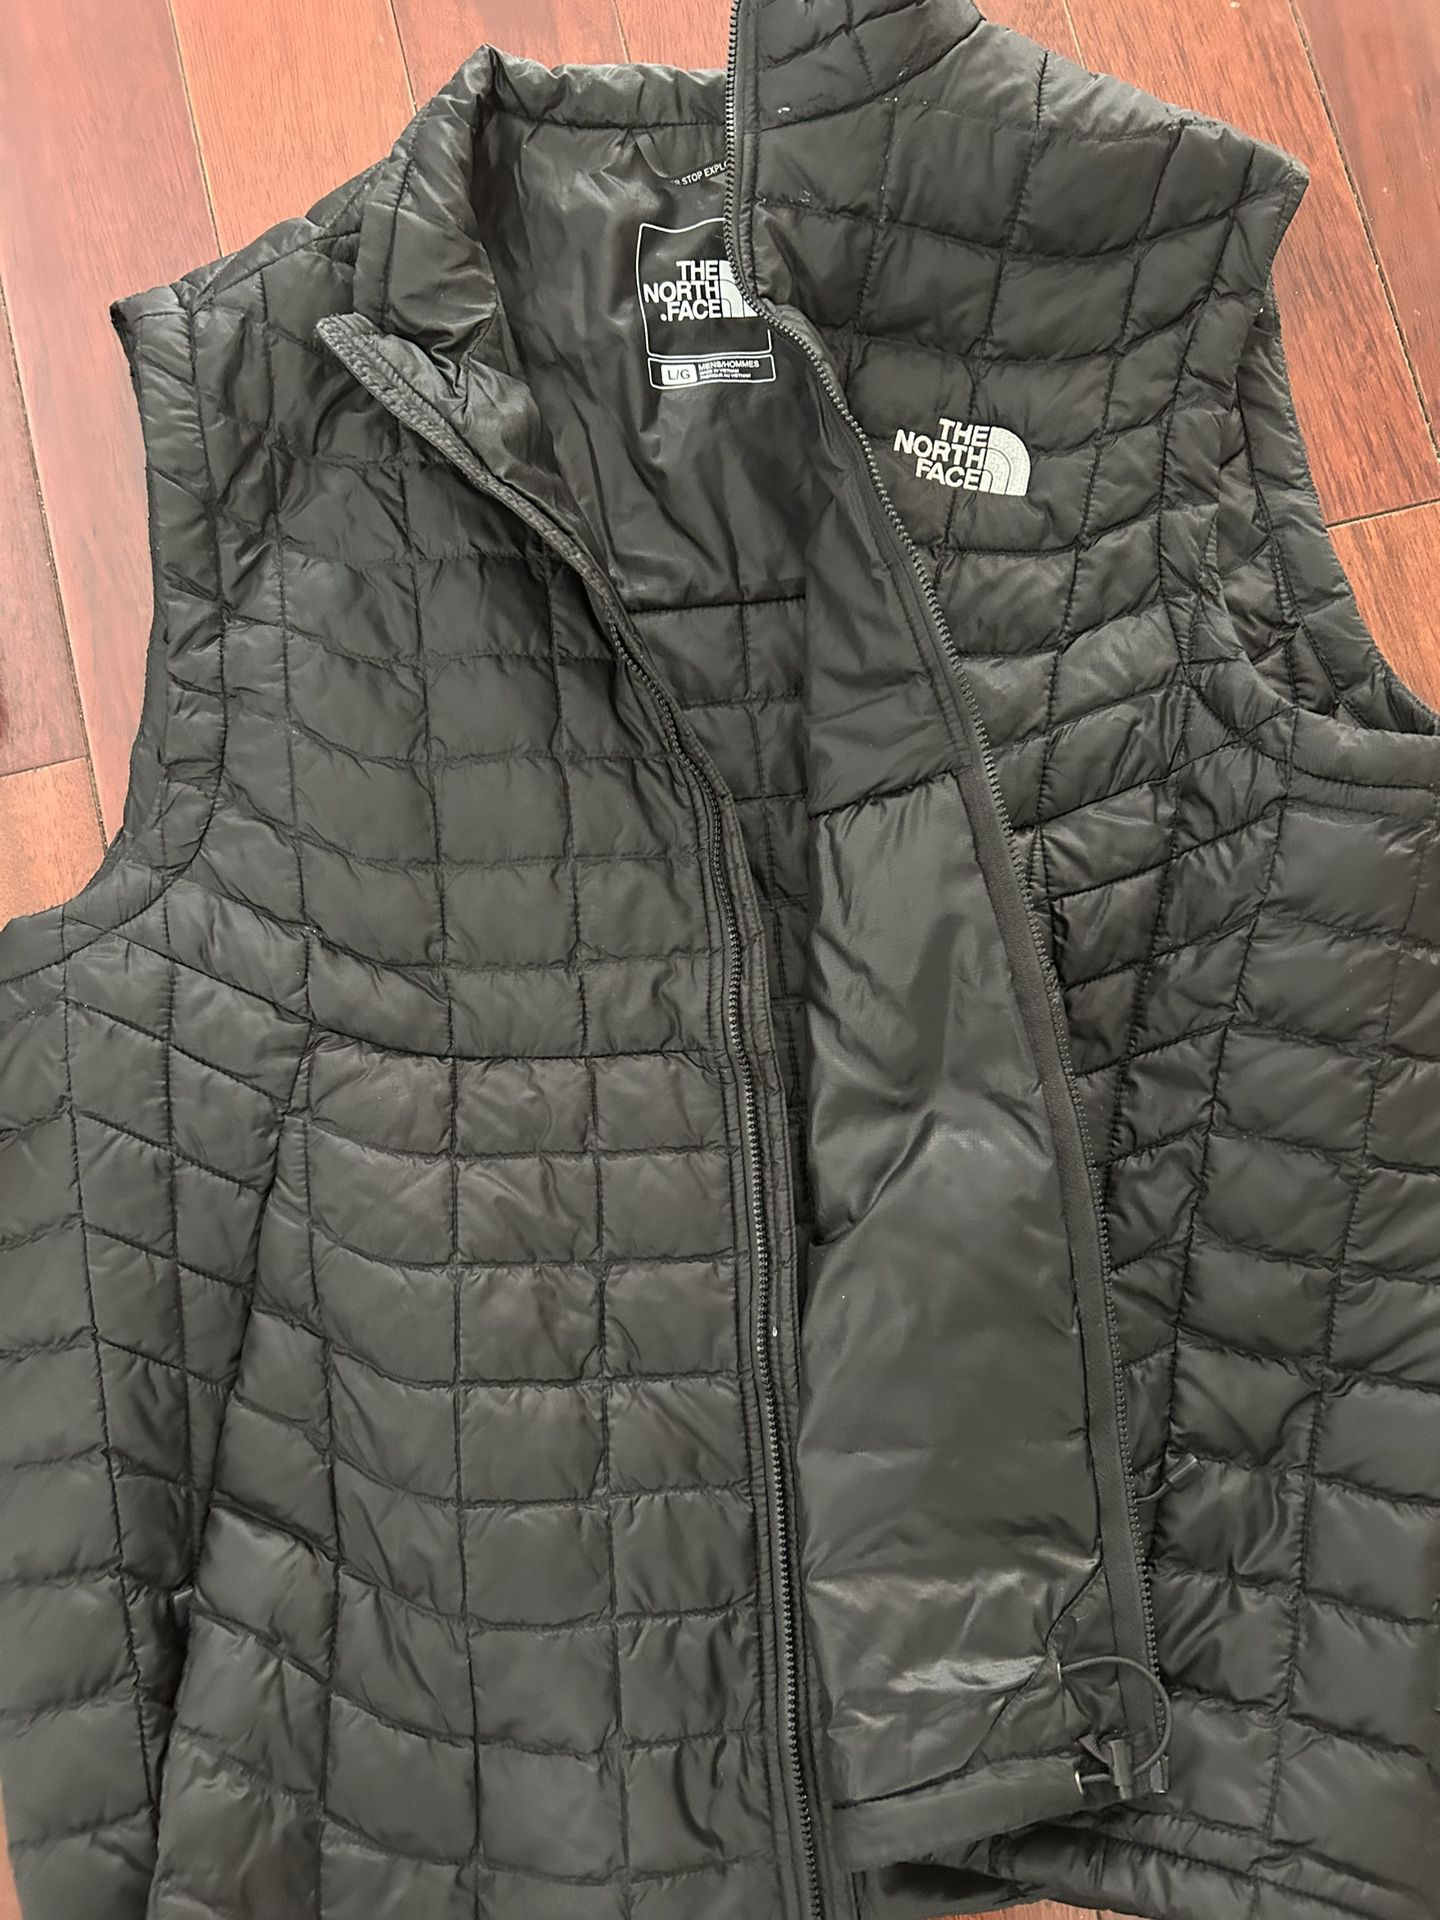 NorthFace - Thermo ball Vest Large